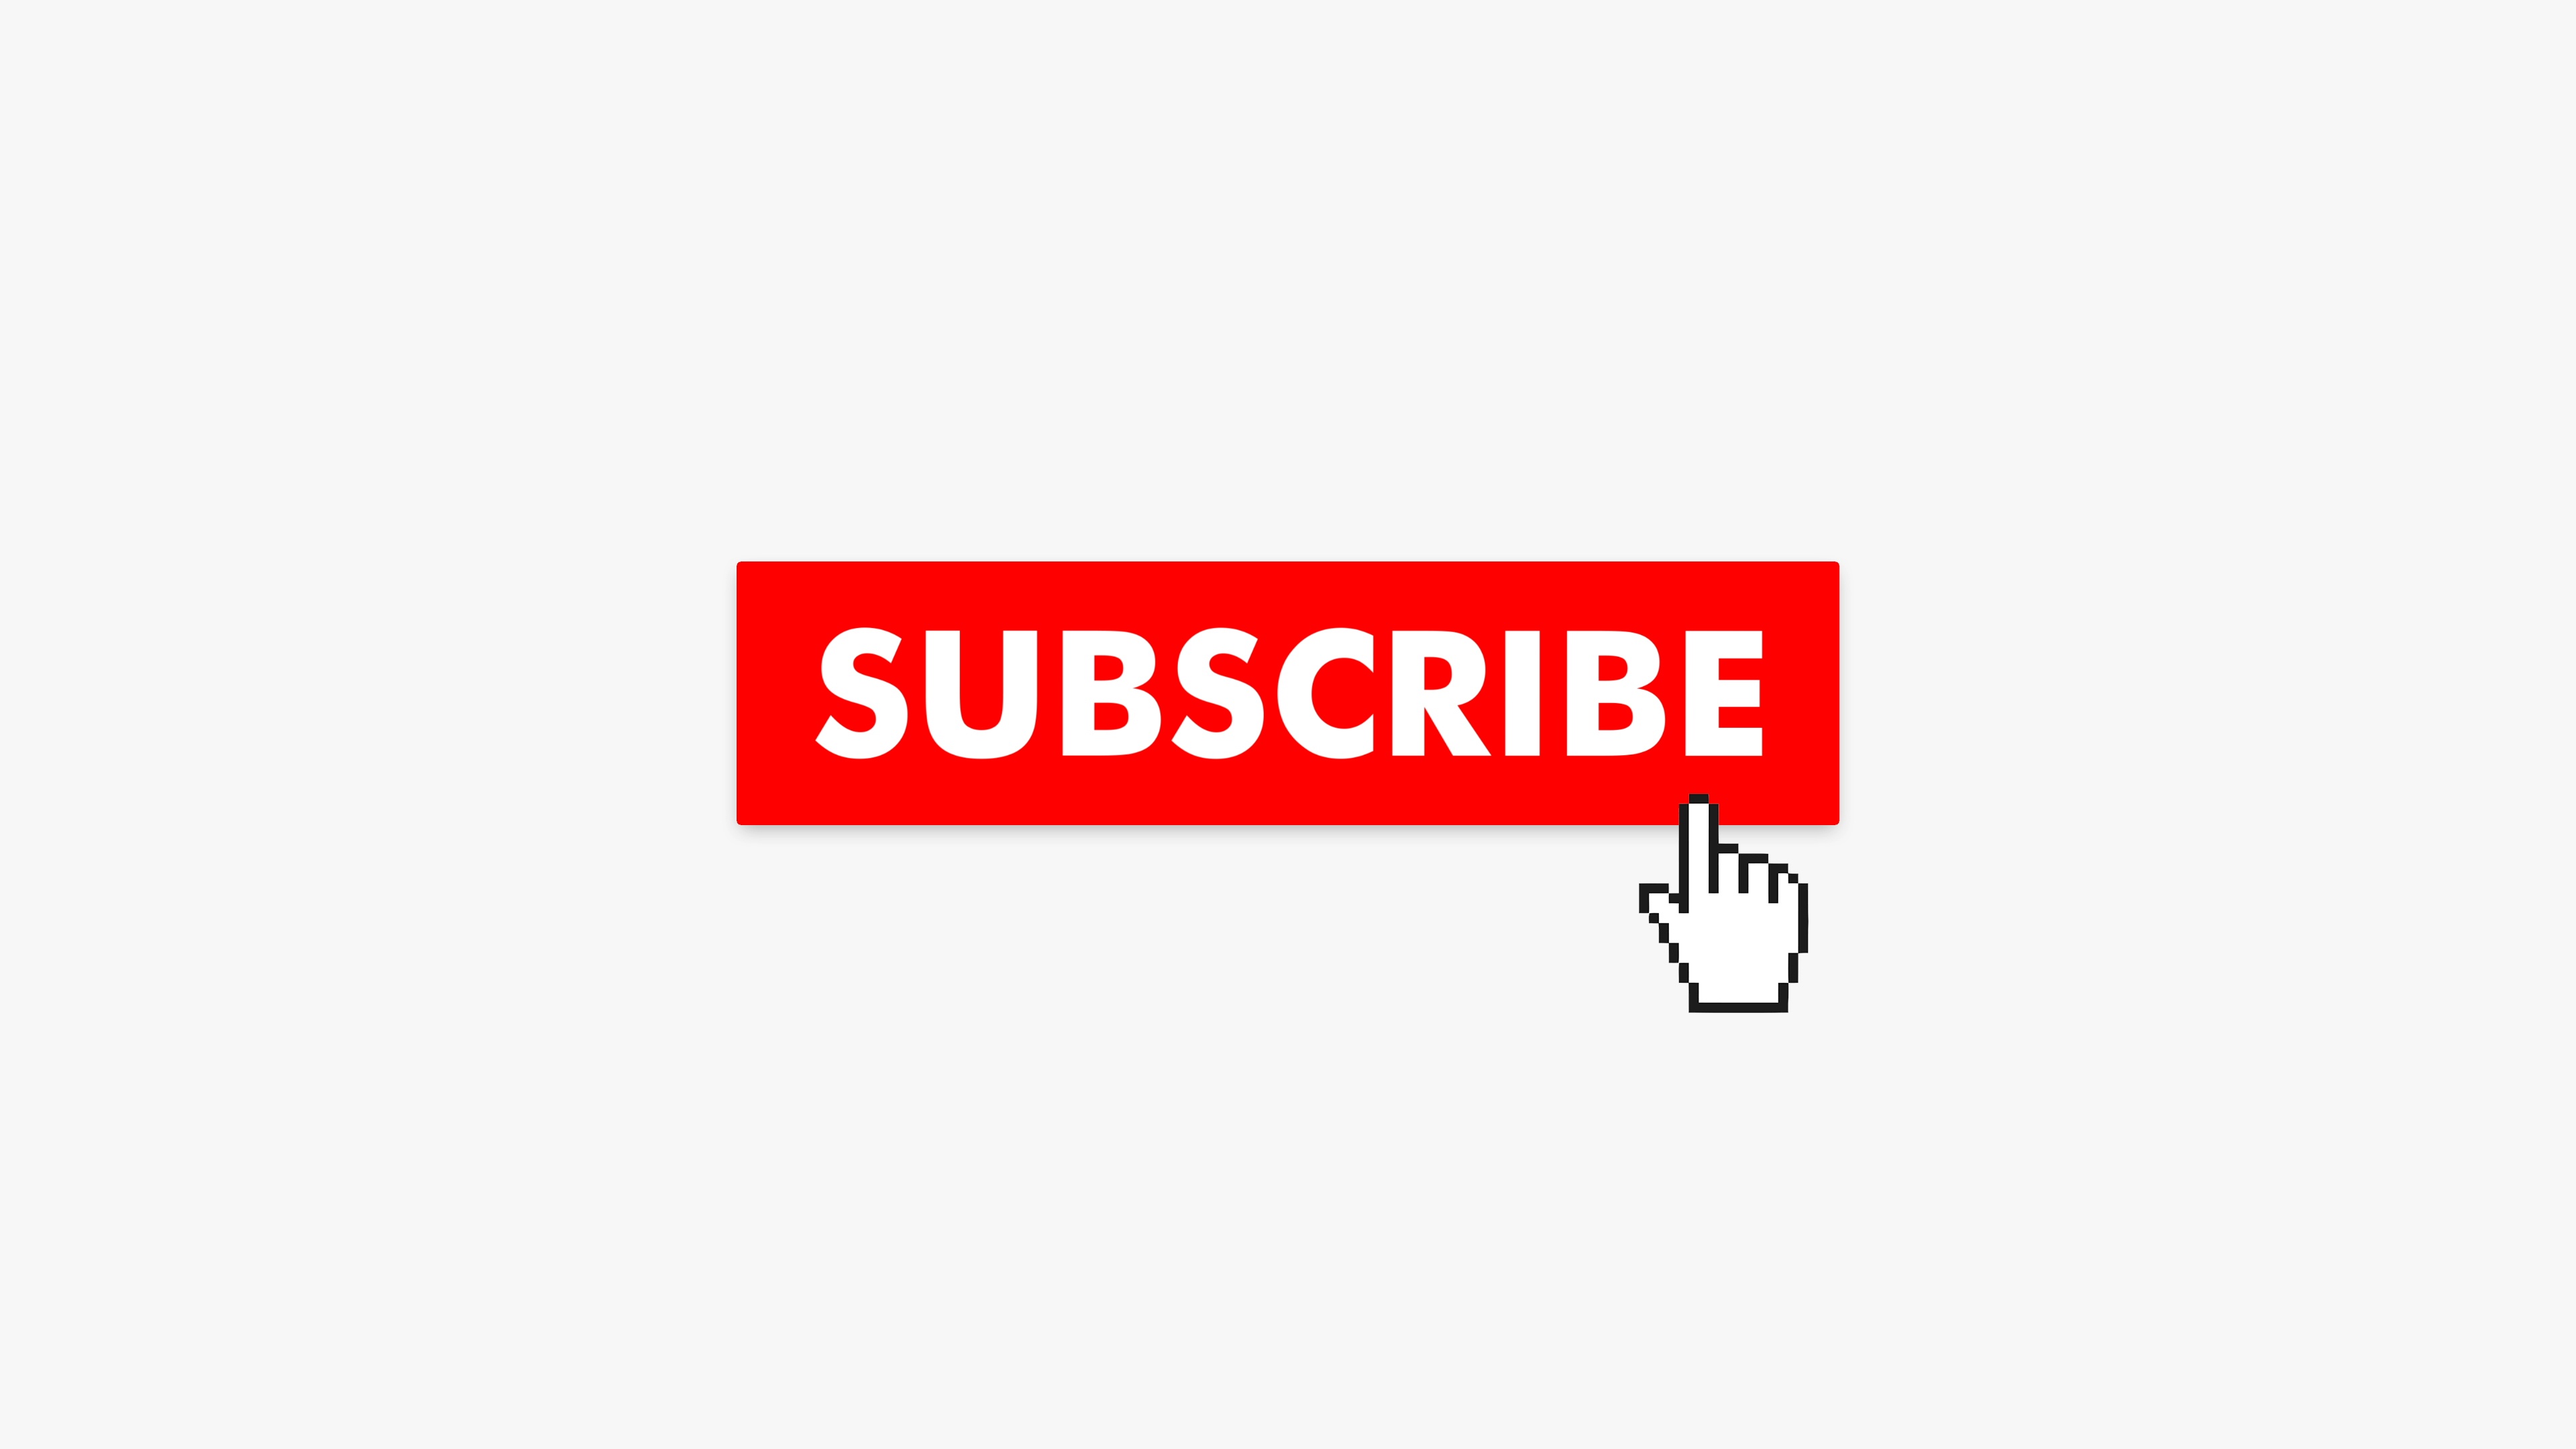 Subscribe ru group